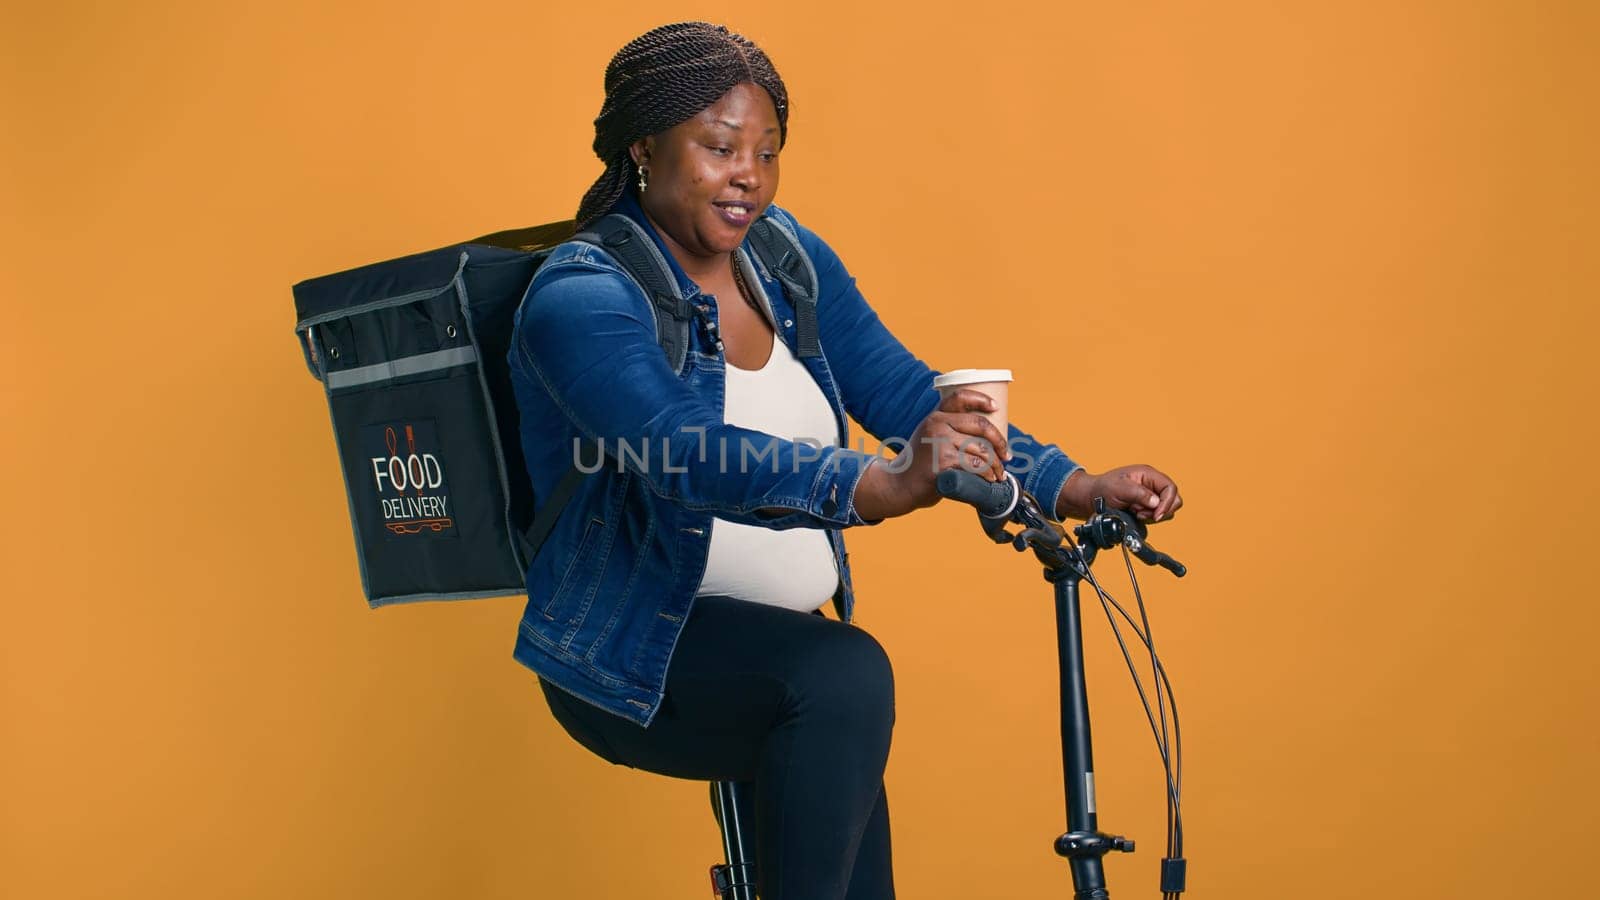 African american delivery woman multitasking carrying coffee in hand and riding bicycle in neighborhood. Active courier on the go having quick energizing refreshment before going for food delivery.